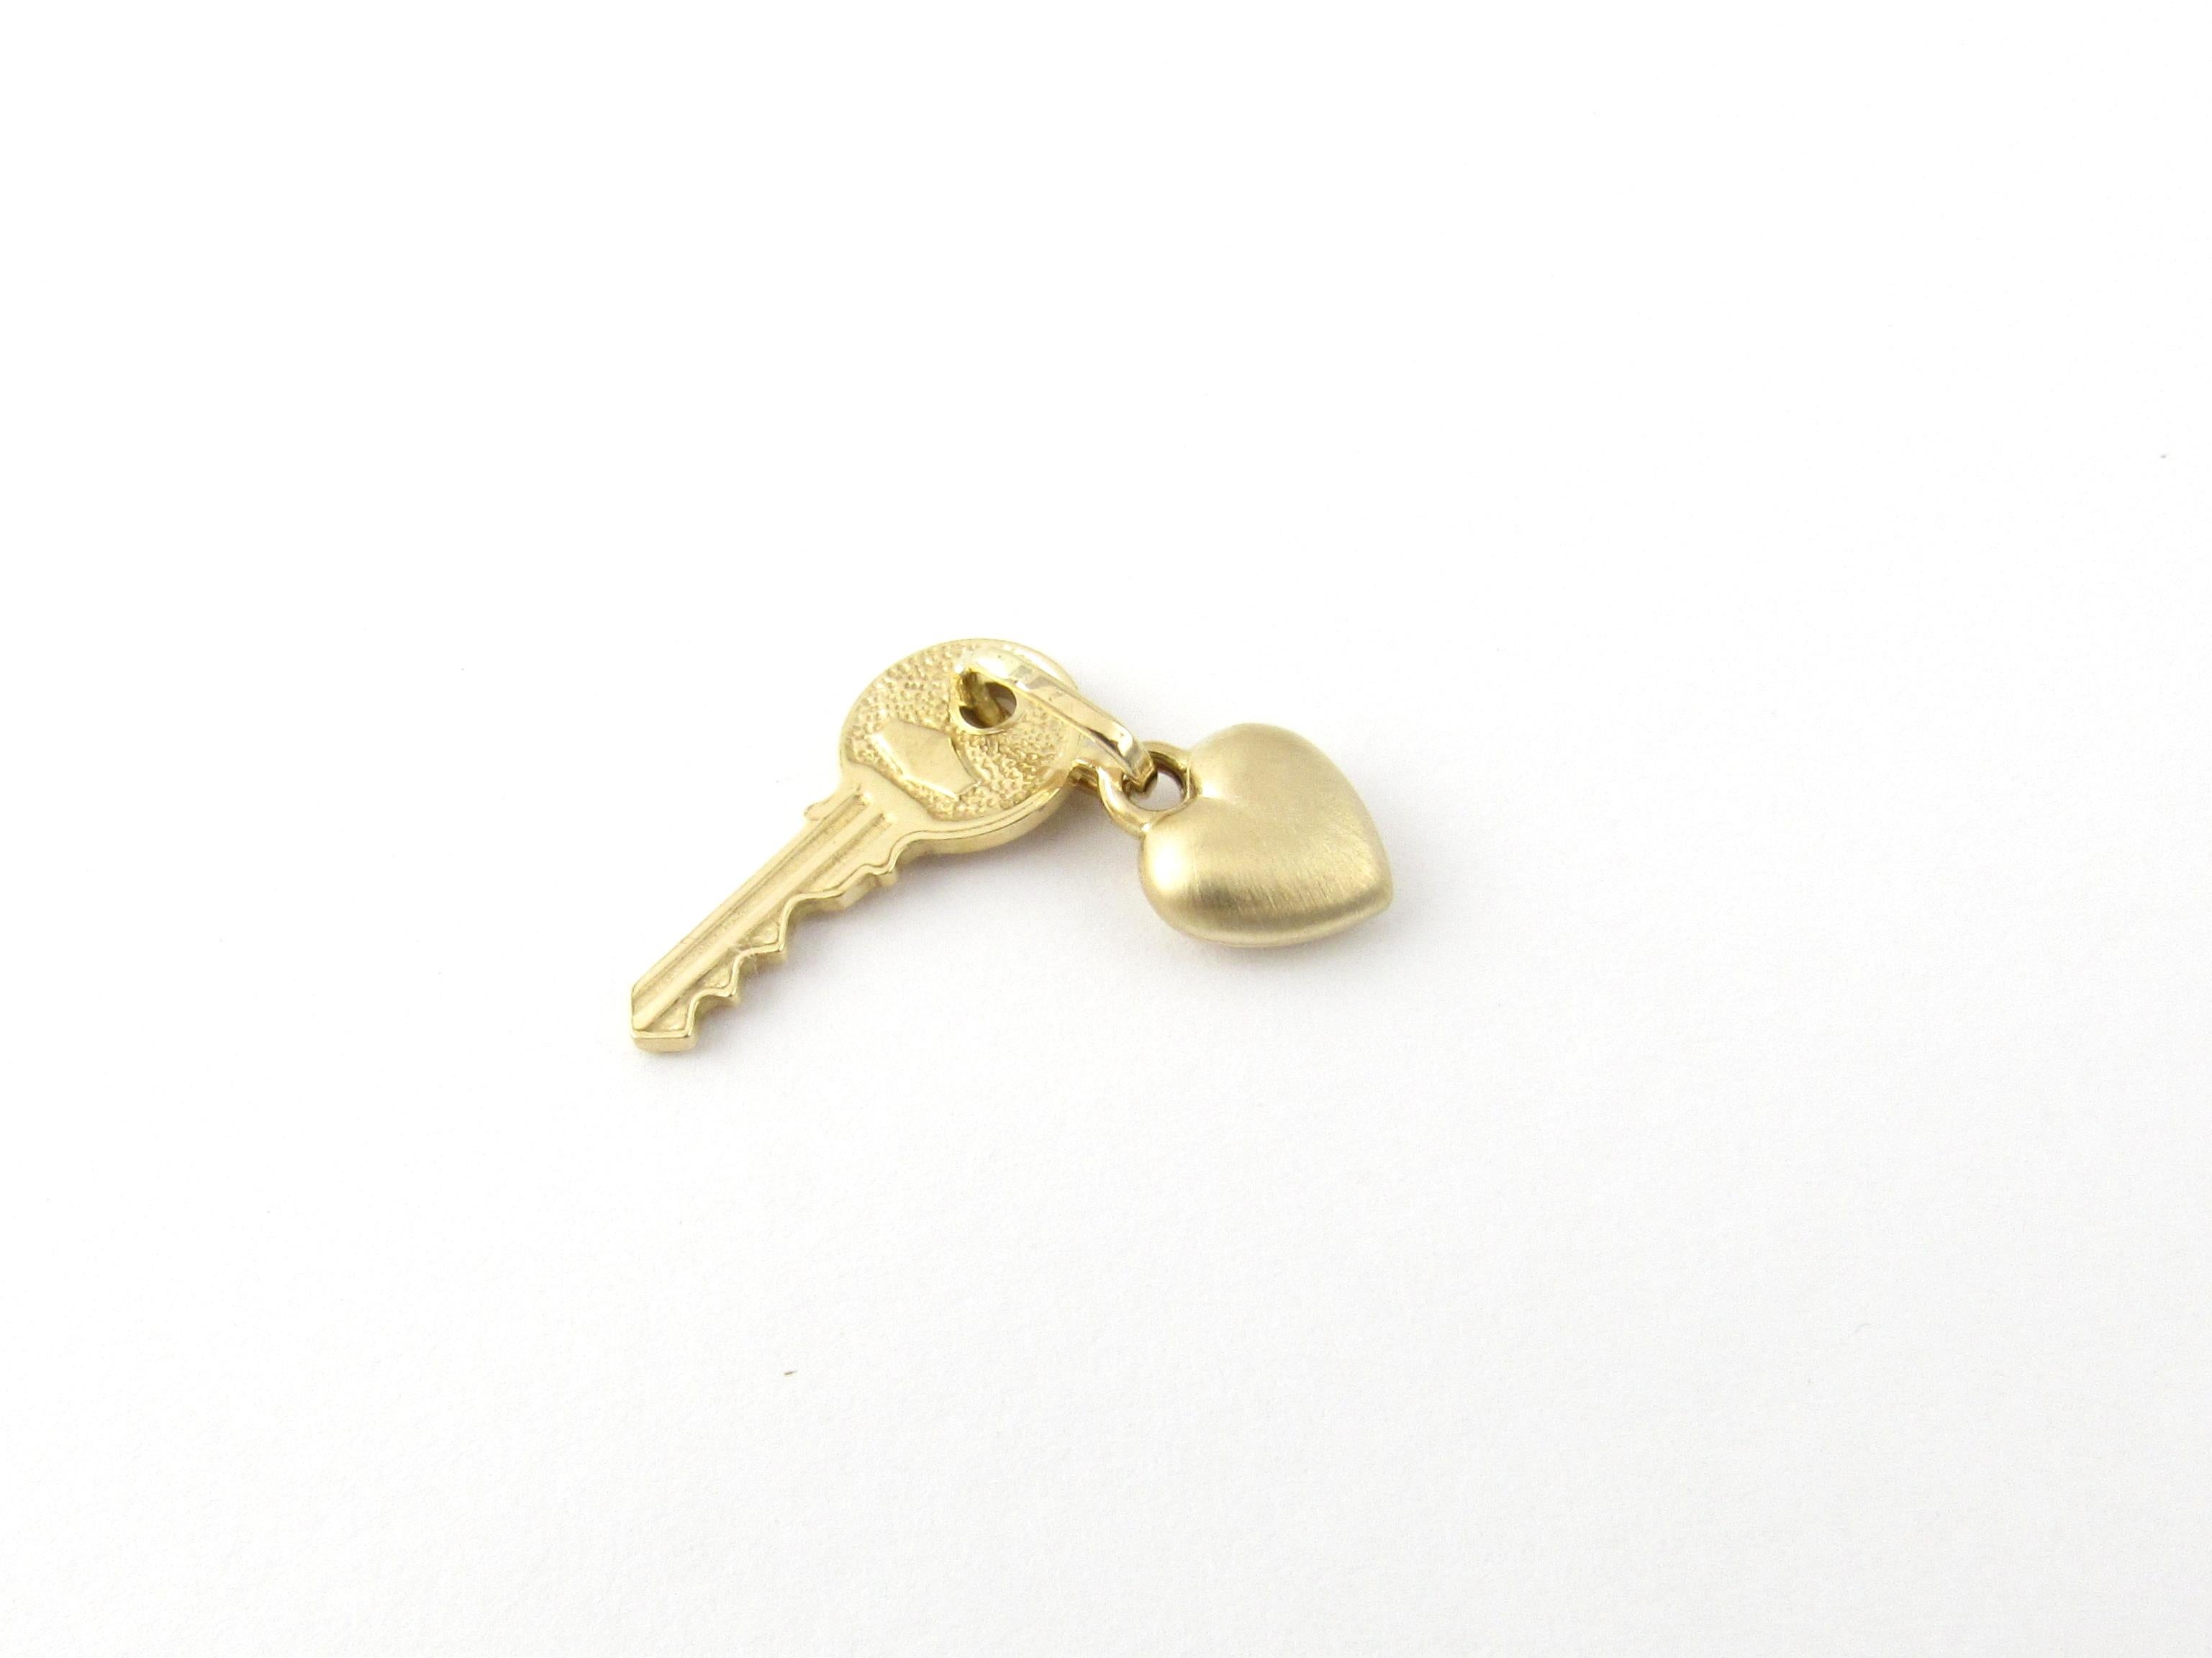 Vintage 14 Karat Yellow Gold Heart and Key Charm

Give her the key to your heart!

This lovely 3D charm features a miniature heart and key beautifully detailed in 14K gold.

Size: key - 19 mm x 9 mm 
heart - 10 mm x 8 mm

Weight: 0.9 dwt. / 1.5